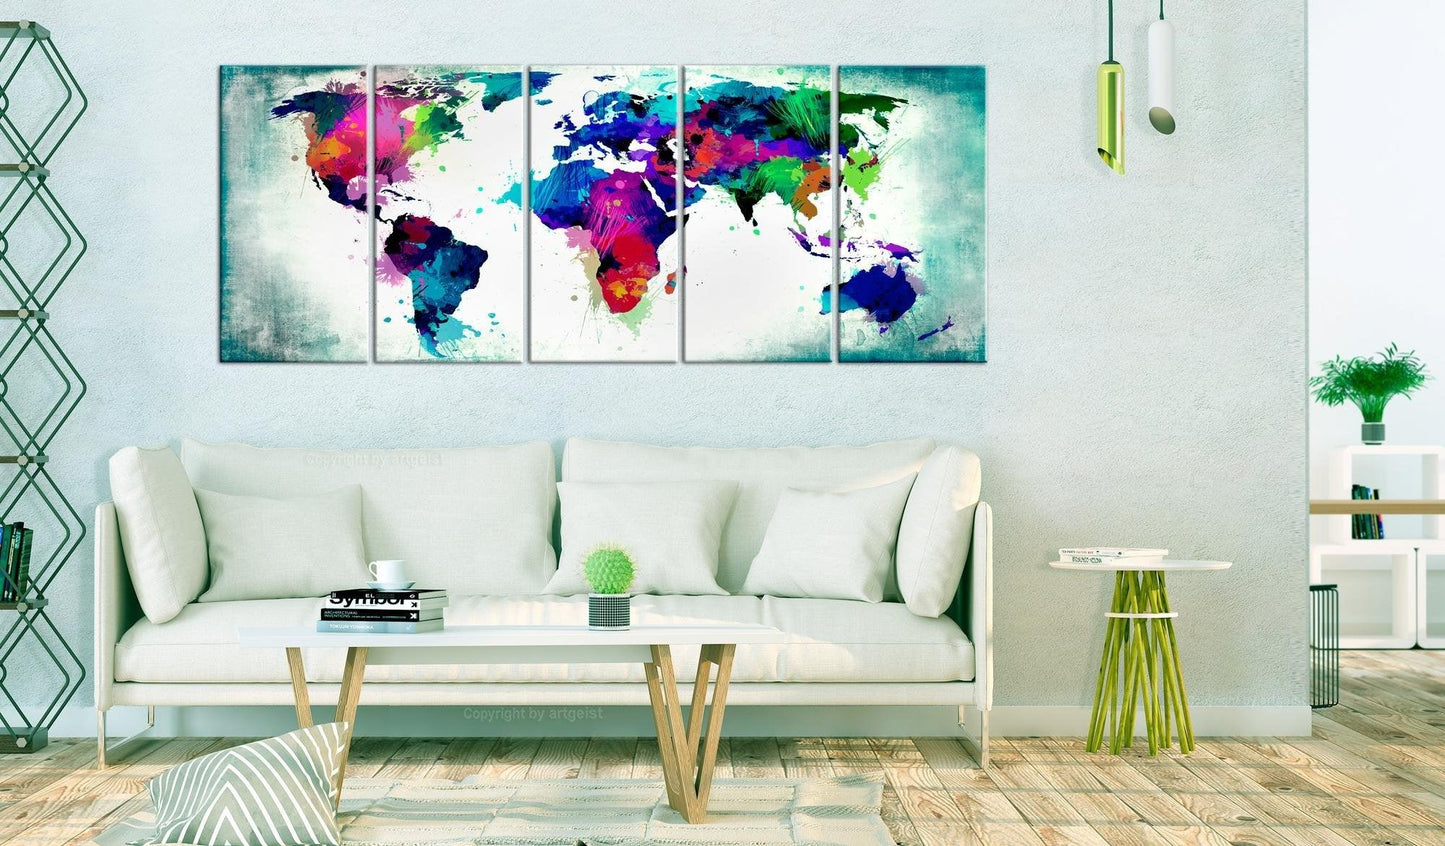 Canvas Print - Colourful Chaos - www.trendingbestsellers.com